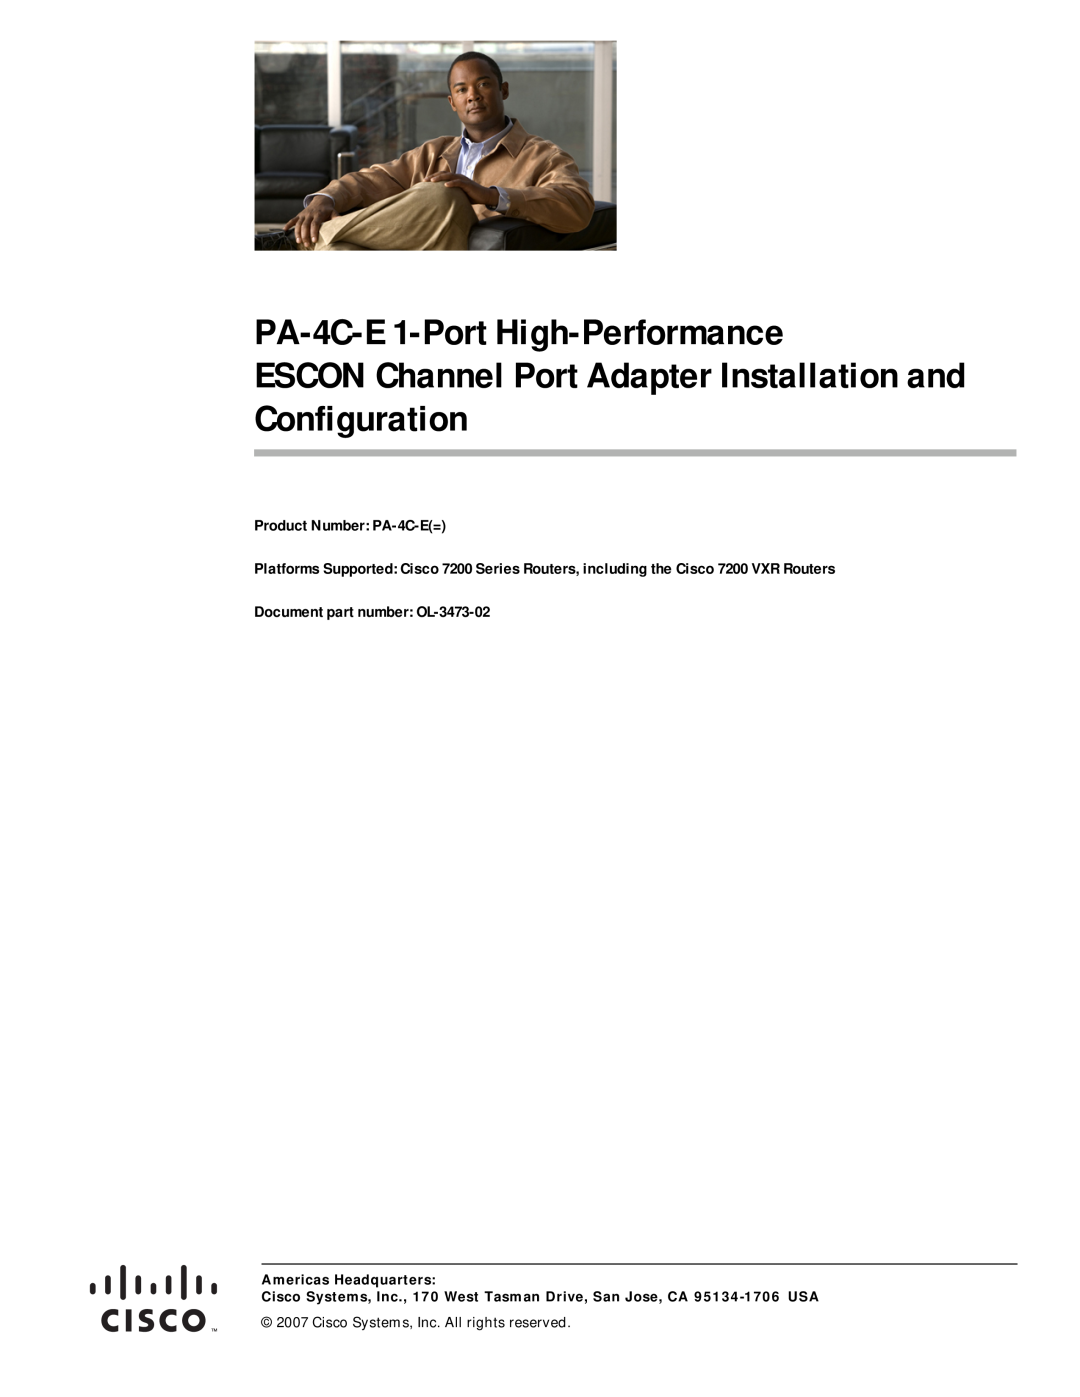 Cisco Systems manual ESCON Channel Port Adapter Installation and, PA-4C-E 1-Port High-Performance, Configuration 